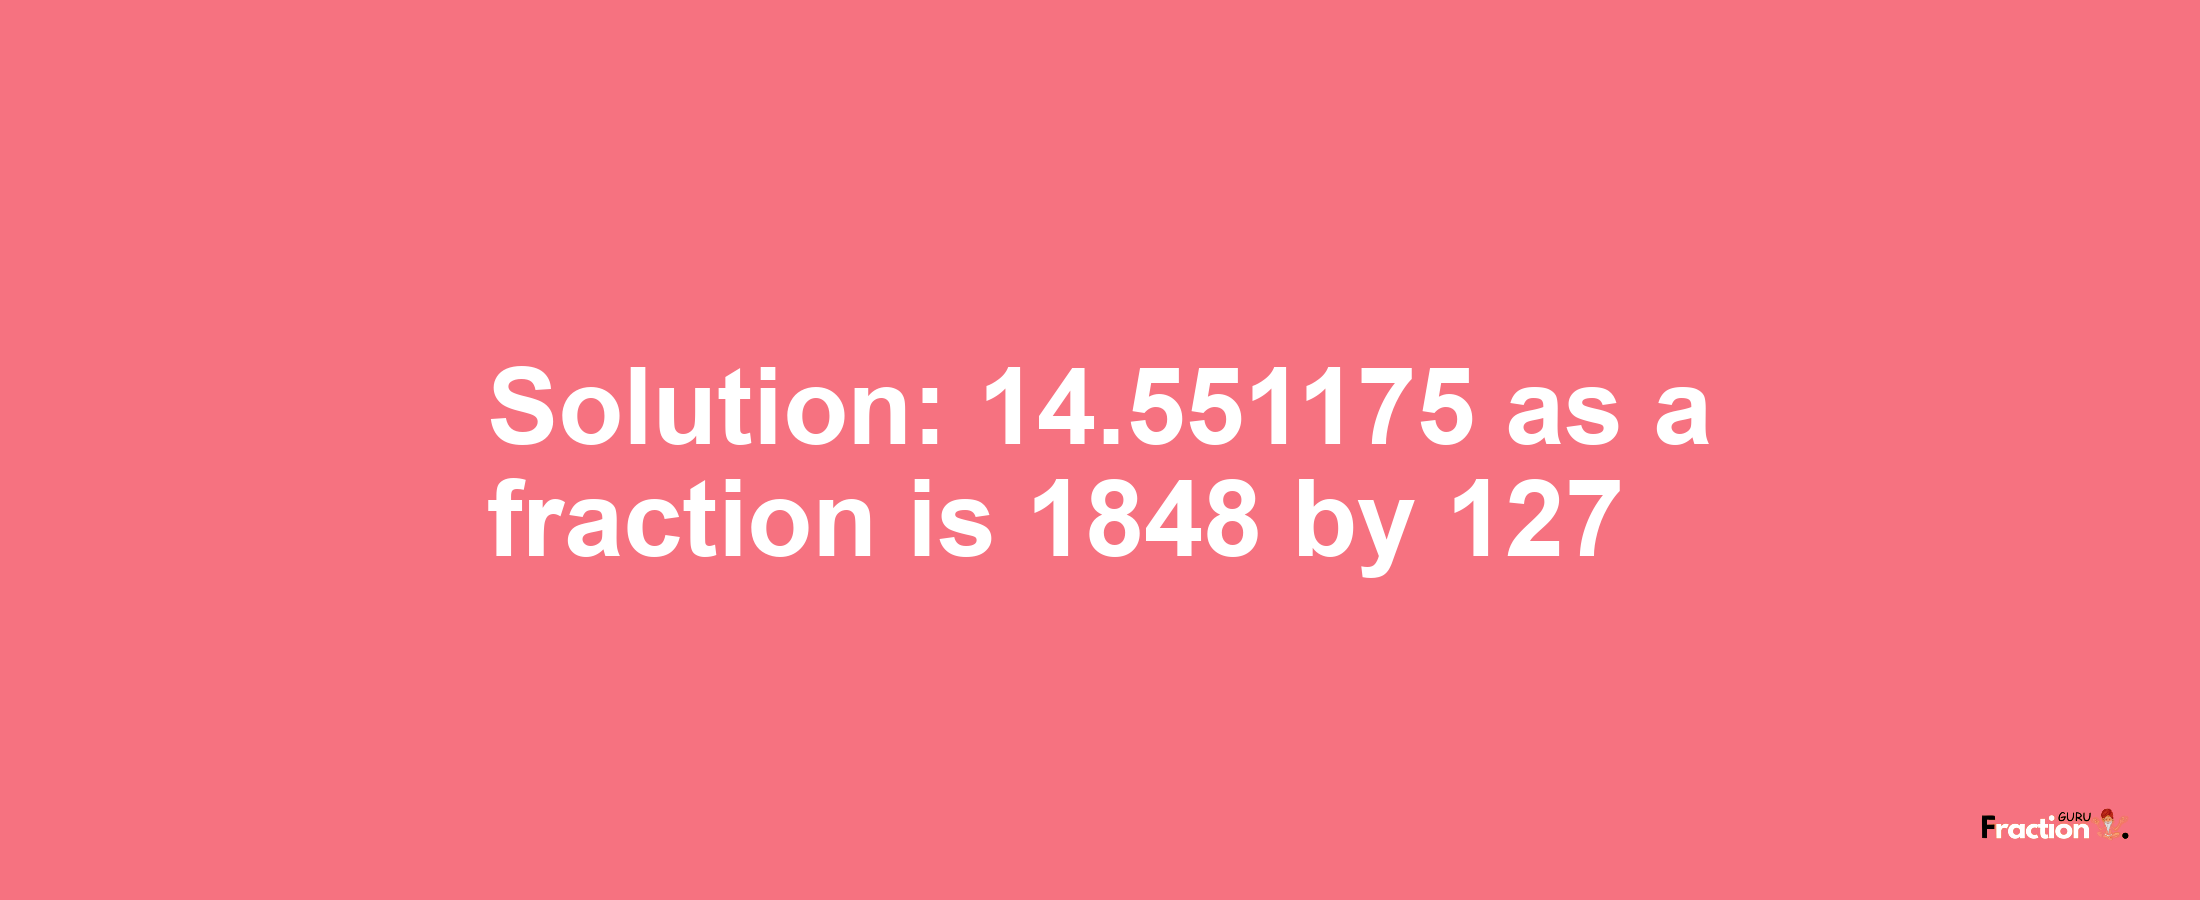 Solution:14.551175 as a fraction is 1848/127